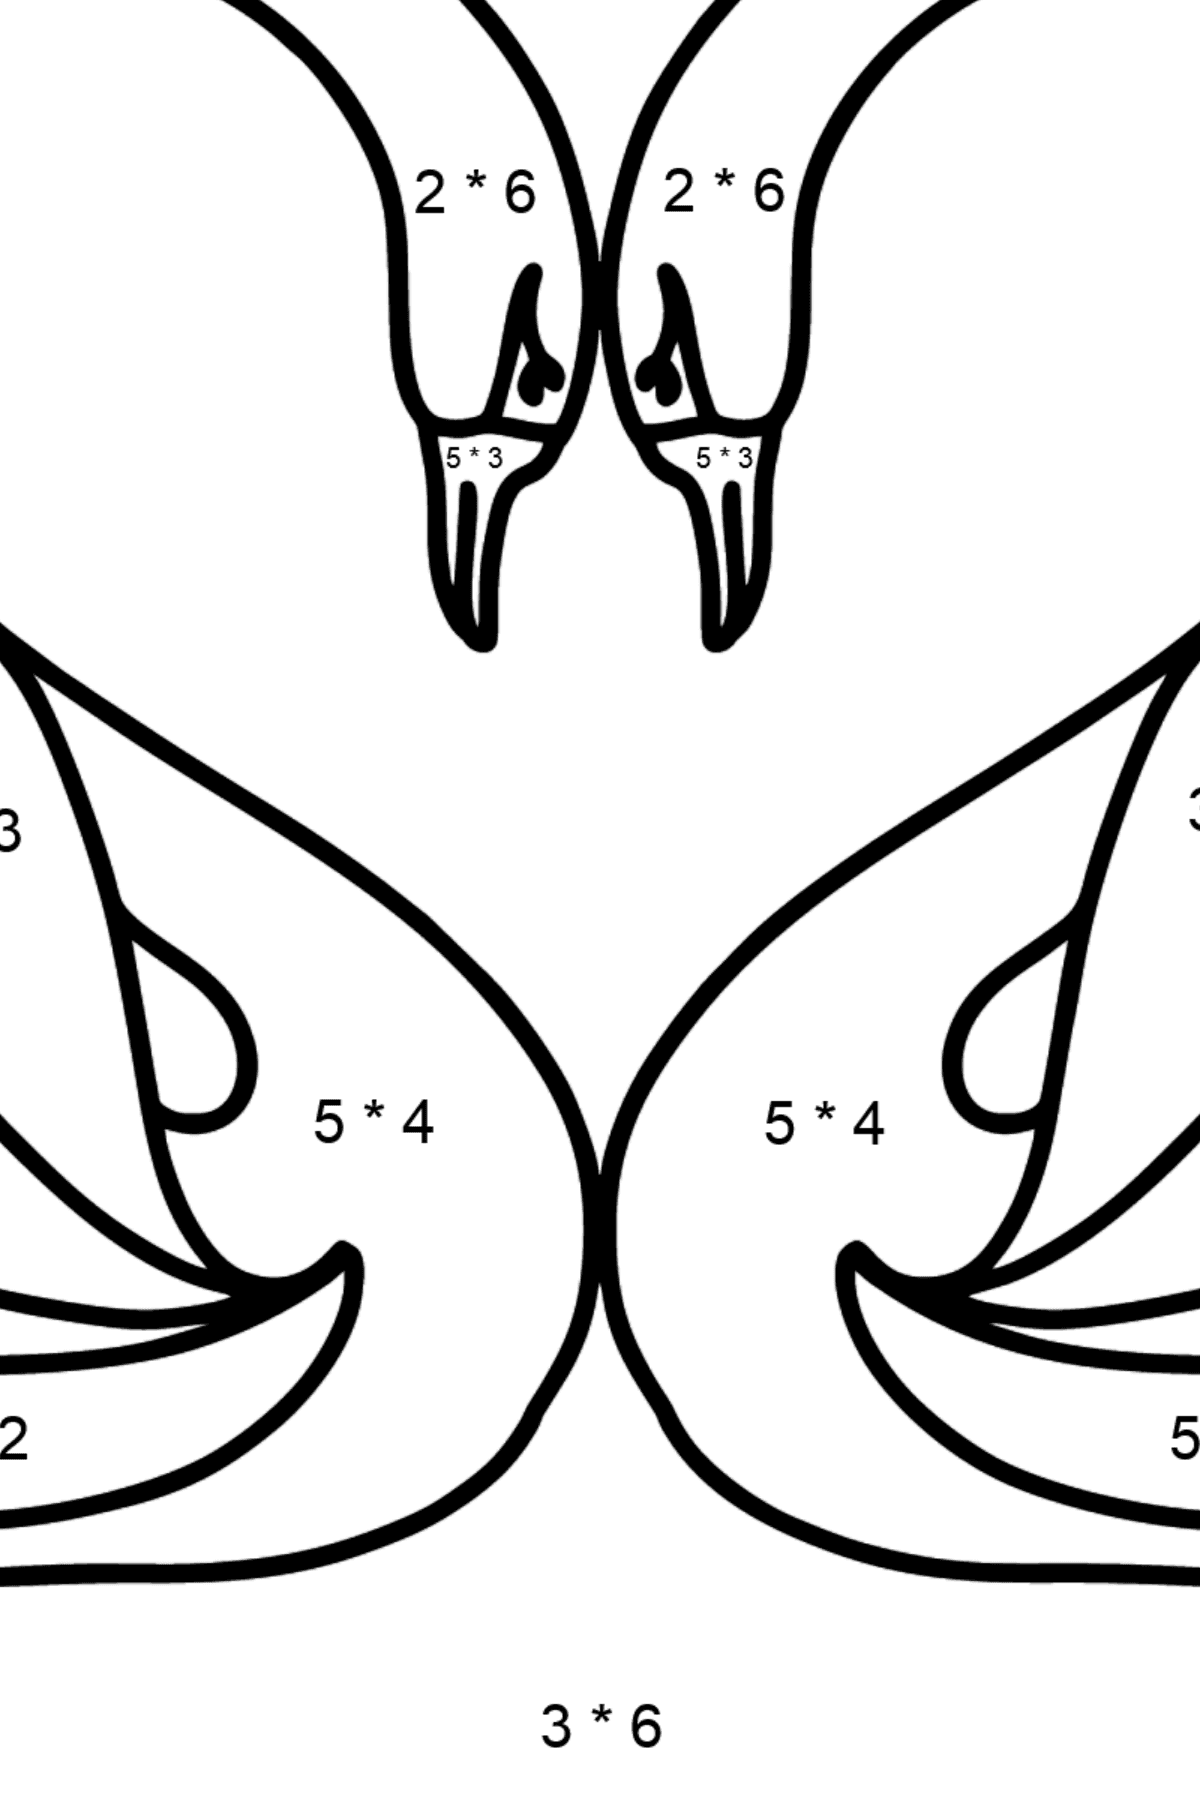 Black Swans coloring page - Math Coloring - Multiplication for Kids